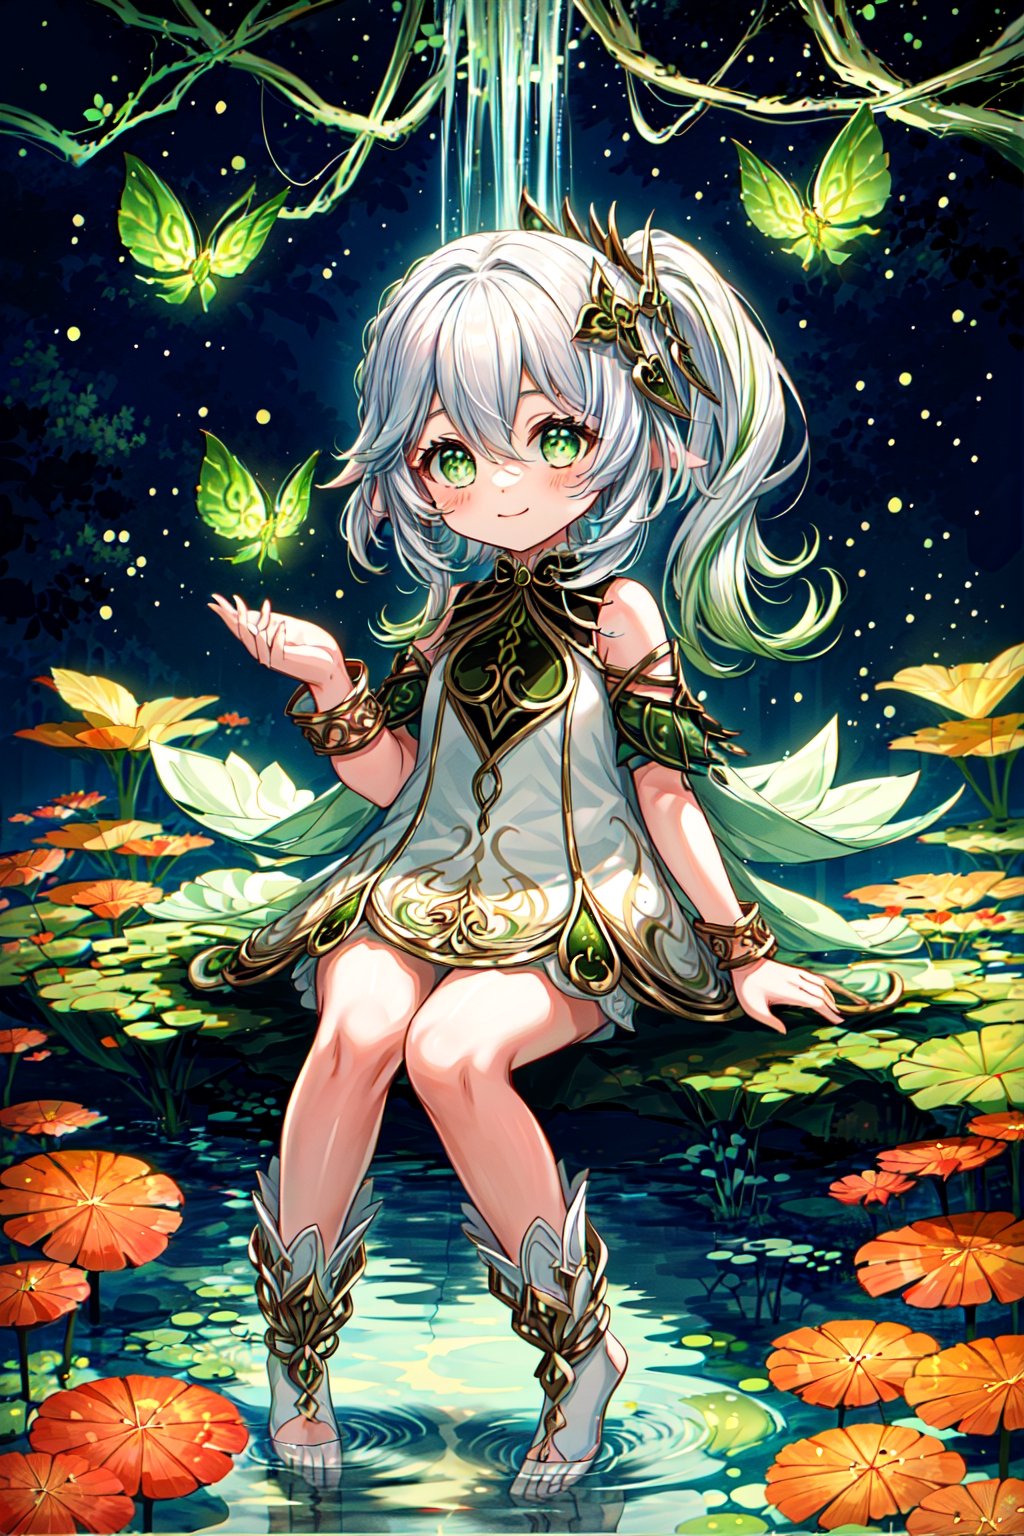 Chibi, dreamy, serene, white and green:1.2),(full body, sitting, nahida with jade bottle:1.1),(praying hands),(blessing),(smiling),(compassionate),(lotus throne, floating, (lotus flowers, branches),(dry ice, fog, below:1.1),(from front),(medium shot),As she sits on a floating lotus throne, nahida holds a jade bottle and makes a praying gesture. She smiles and blesses the world with her compassion. Behind her, lotus flowers and branches surround her, creating a natural and peaceful backdrop. Below her, dry ice forms a fog that adds to the dreamy atmosphere. The main colors are white and green, creating a pure and harmonious mood.(magazine:1.3), (cover-style:1.3), fashionable, kid,  vibrant, dynamic, background, elements, statement, majestic, masterpiece, best quality, lens flare, depth of field,(backlighting, Backlight:1.1),  grating,raster,(Light through hair:1.2), chibi, nahida